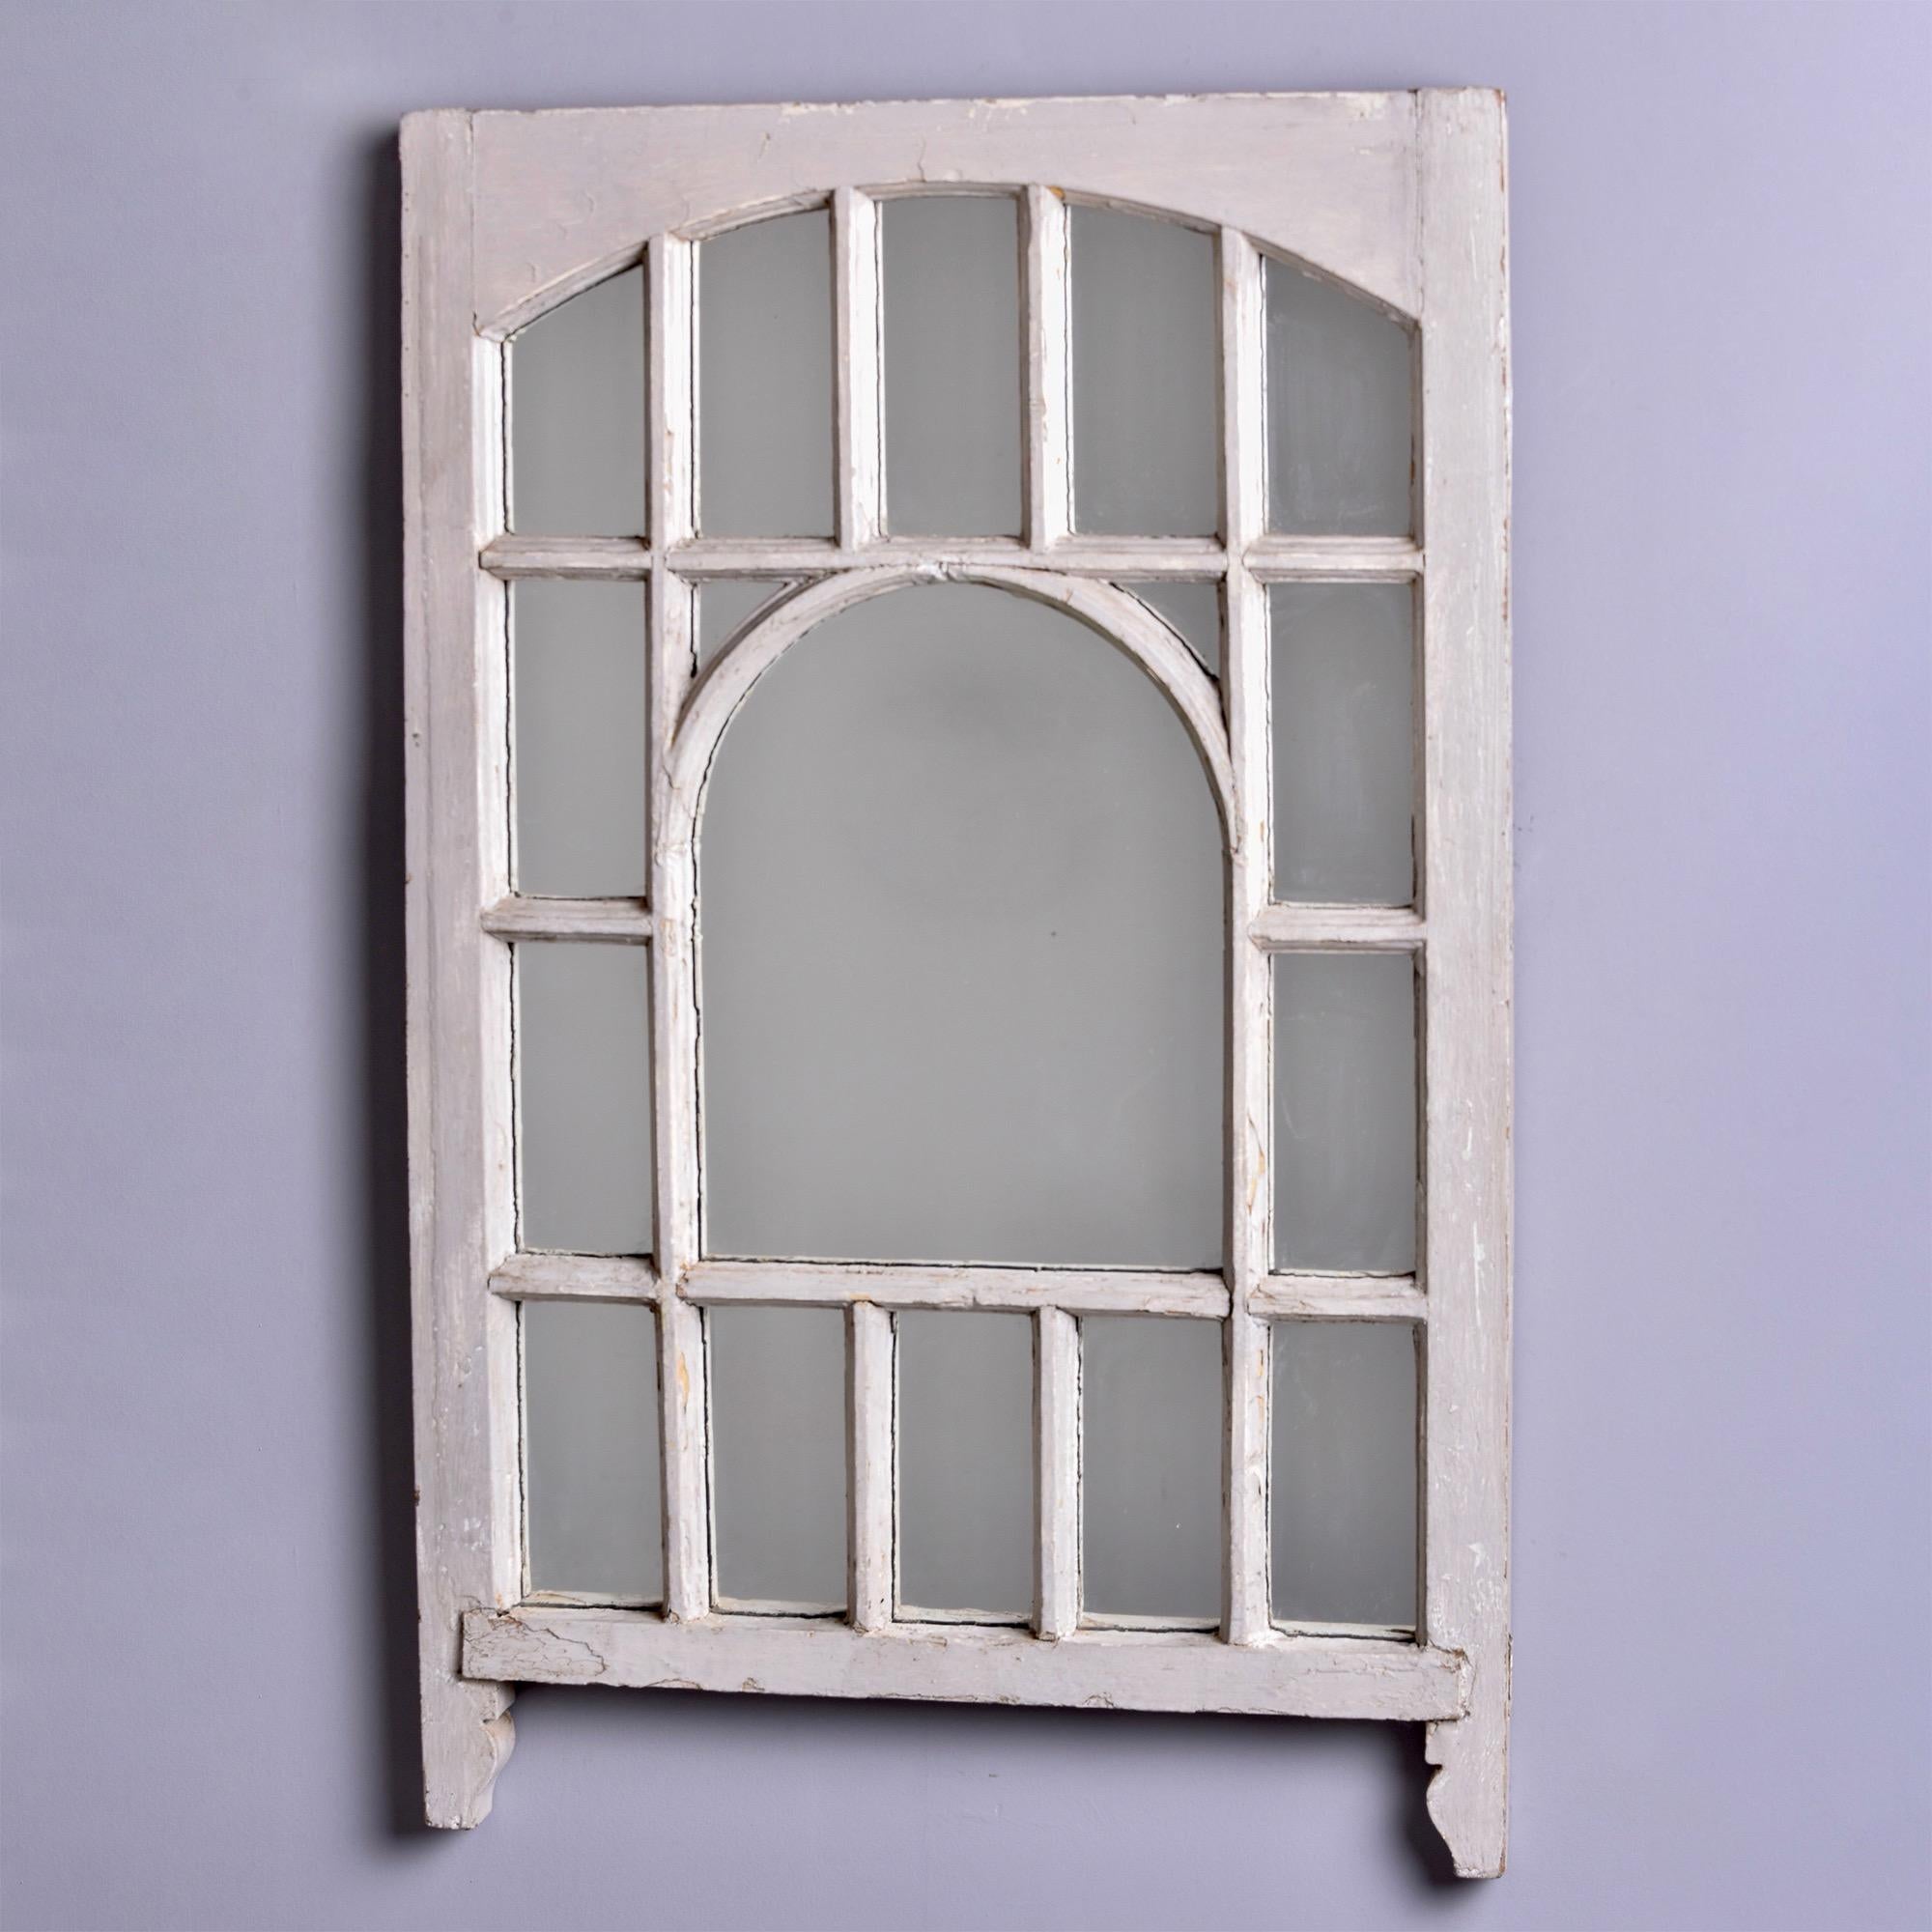 Found in England, this circa 1900 wood window has been painted off white and now frames a mirror. Arched center with rectangular panes that arch at the top. Two mirrors available at the time of this posting. Priced and sold individually.